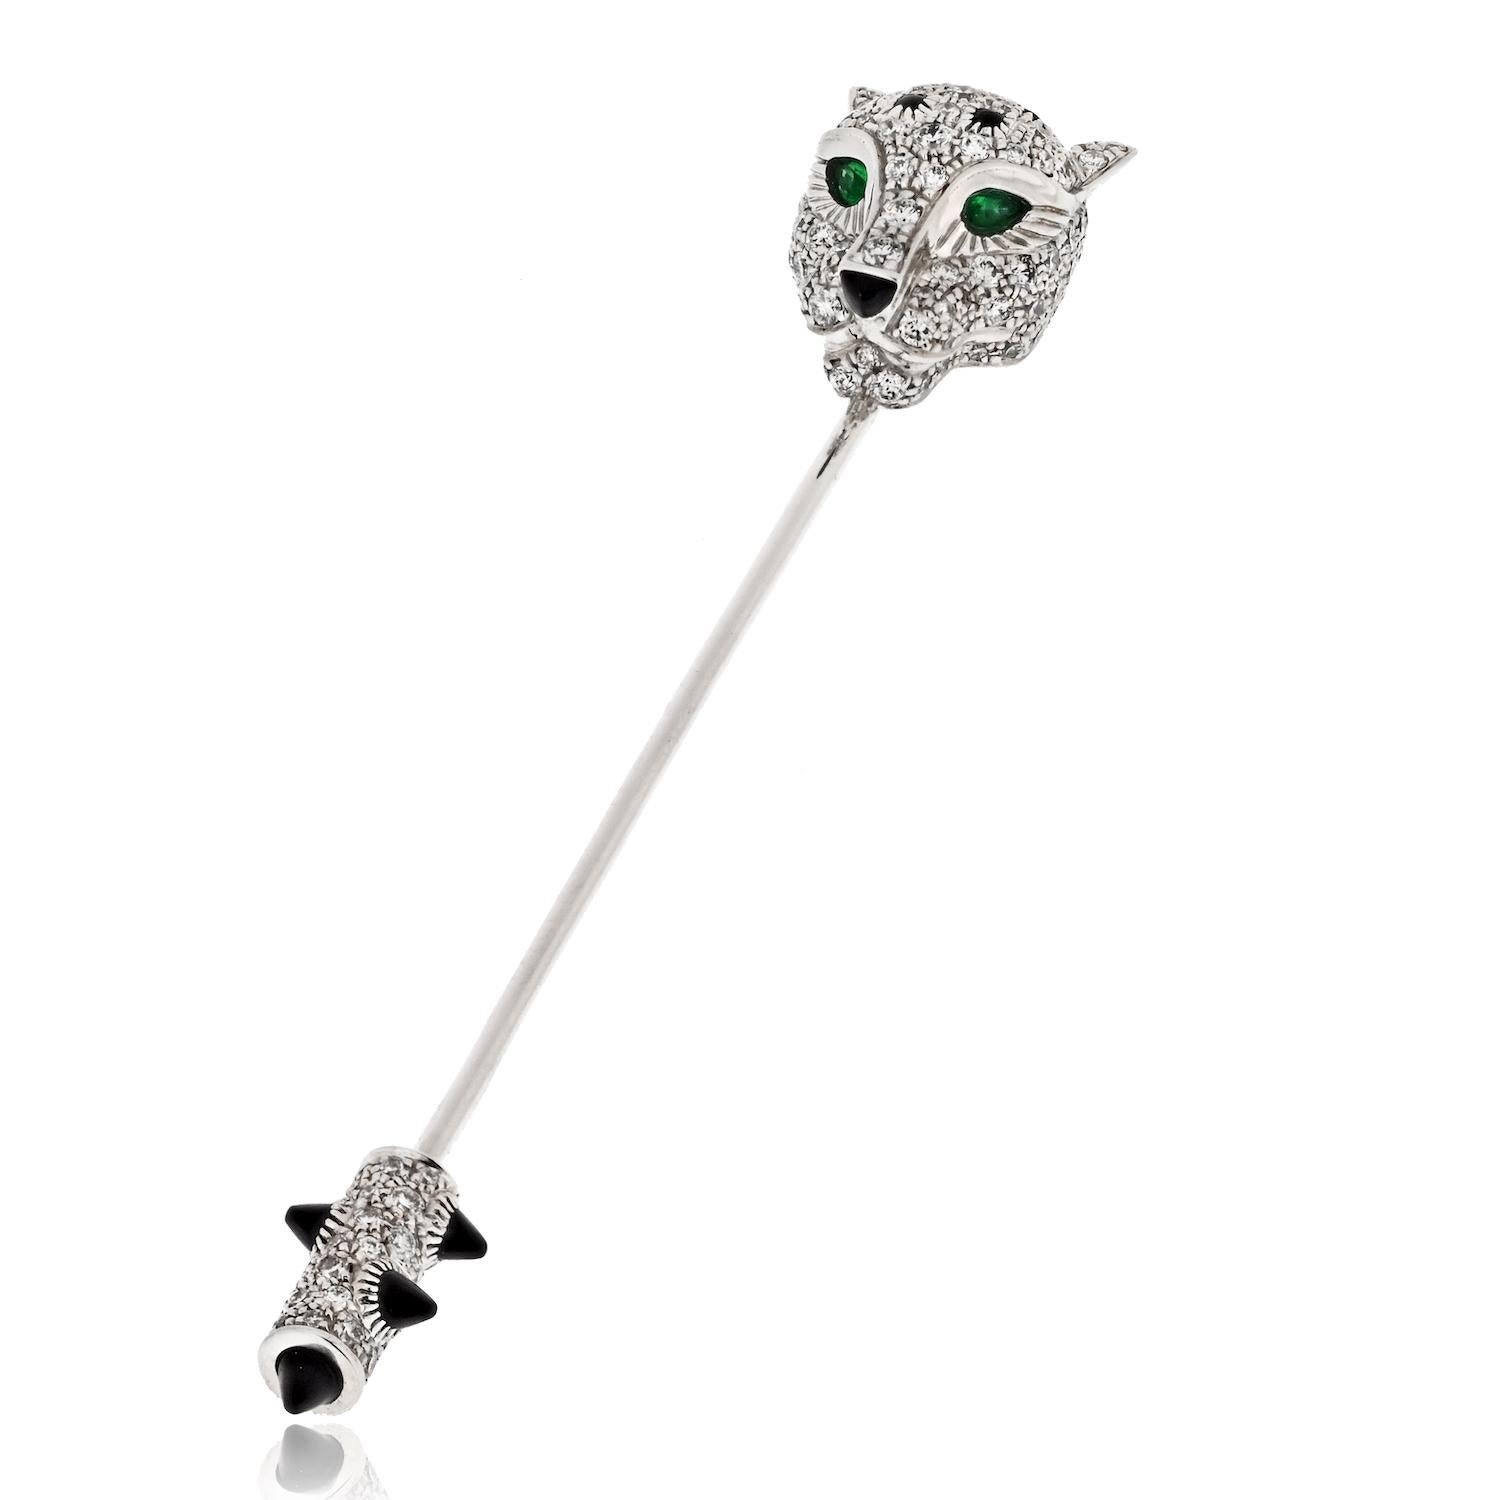 The Cartier 18K White Gold Diamond Panthere Jabot Brooch is the epitome of elegance and sophistication. This iconic piece is a stunning example of Cartier's craftsmanship and design, sure to add a touch of luxury to any ensemble.

Crafted from